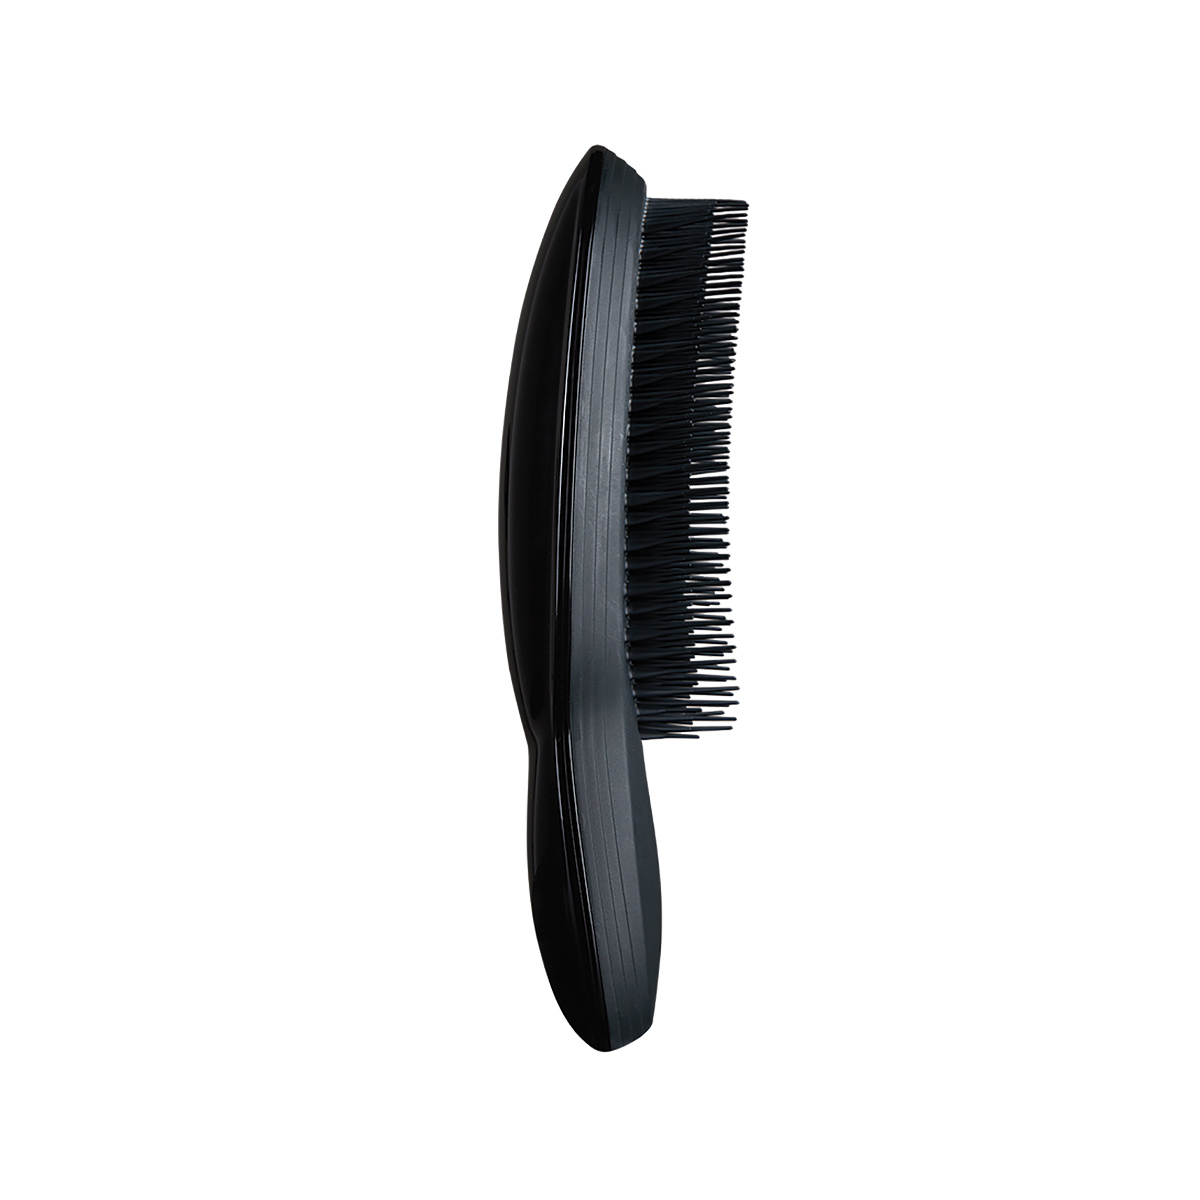 Расческа Tangle Teezer The Ultimate Finisher Black расческа tangle teezer the ultimate styler millennial pink